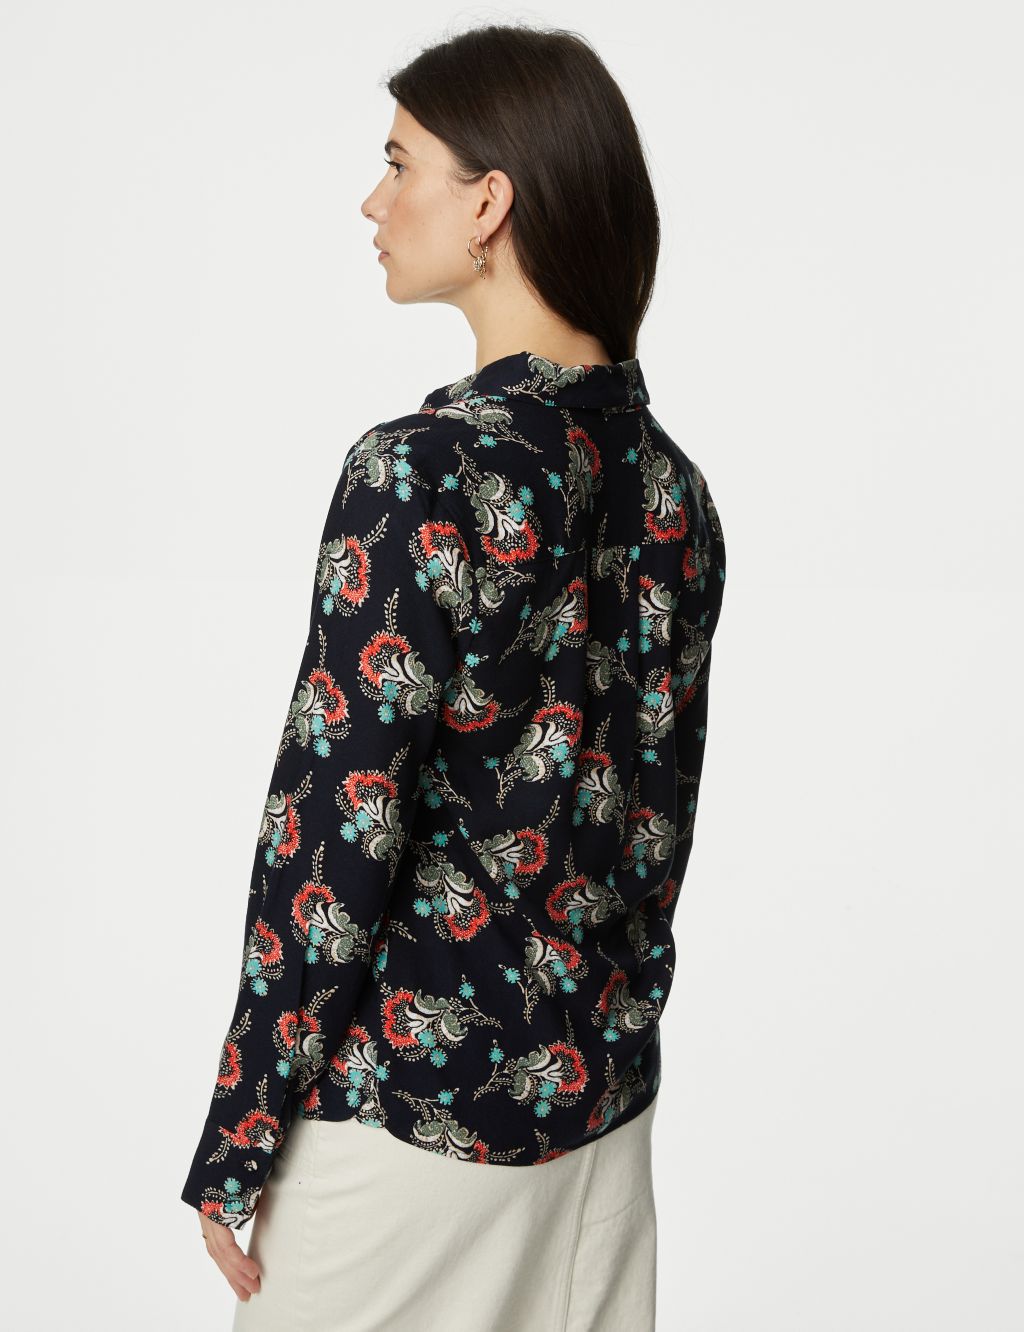 Floral Collared Shirt image 5